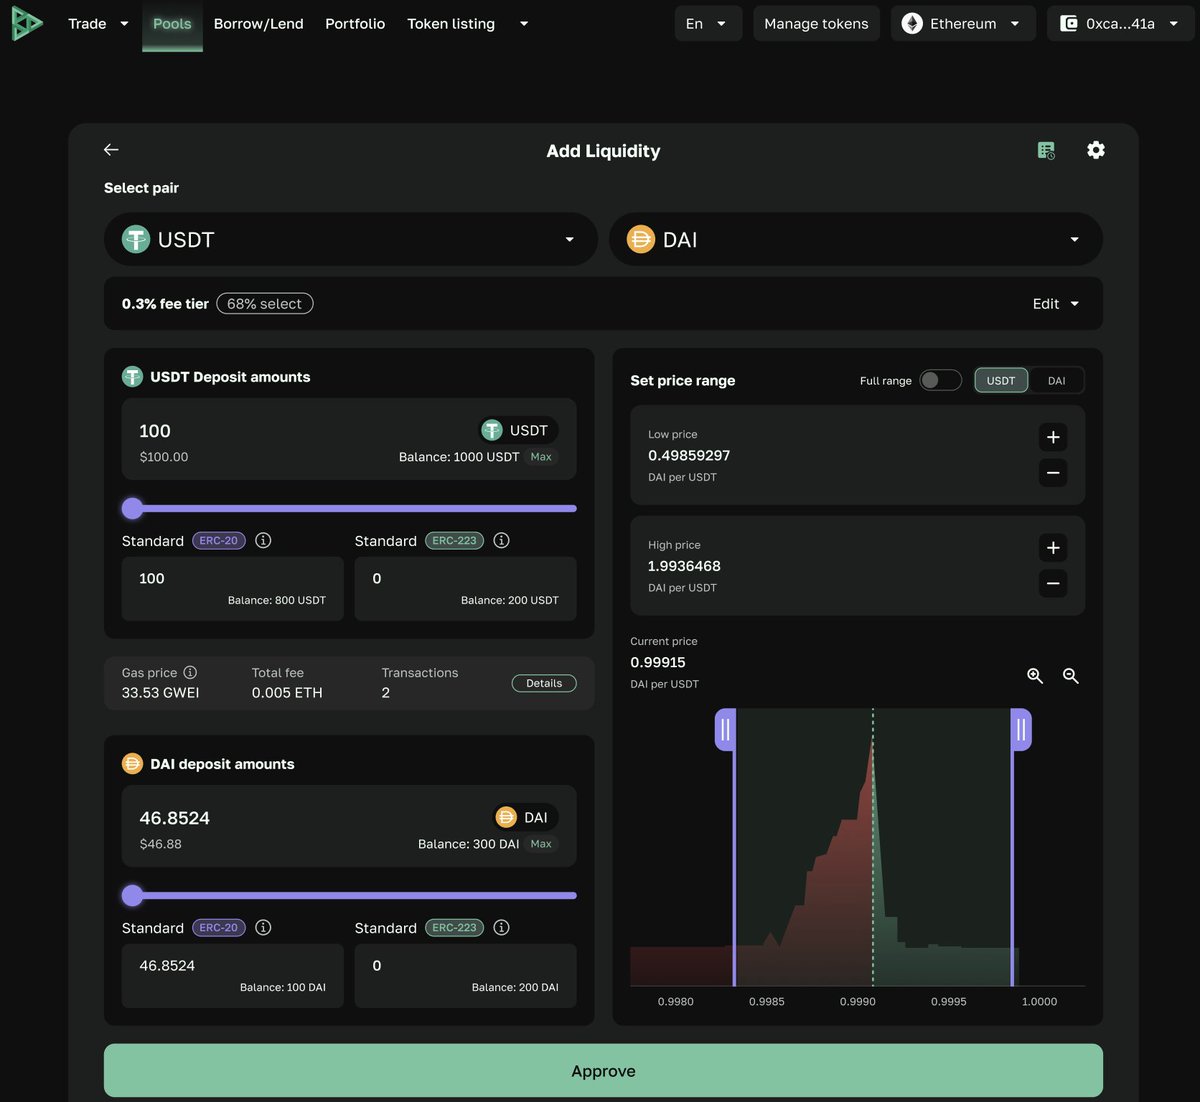 Take a sneak peek into the sleek #Dex223 interface! 

Our Liquidity Adding and Swap Pages are polished to perfection, offering a seamless user experience. 

Stay tuned as we finalize the #MarginTrading page and introduce support for 'double standard' tokens, ushering in a new era…